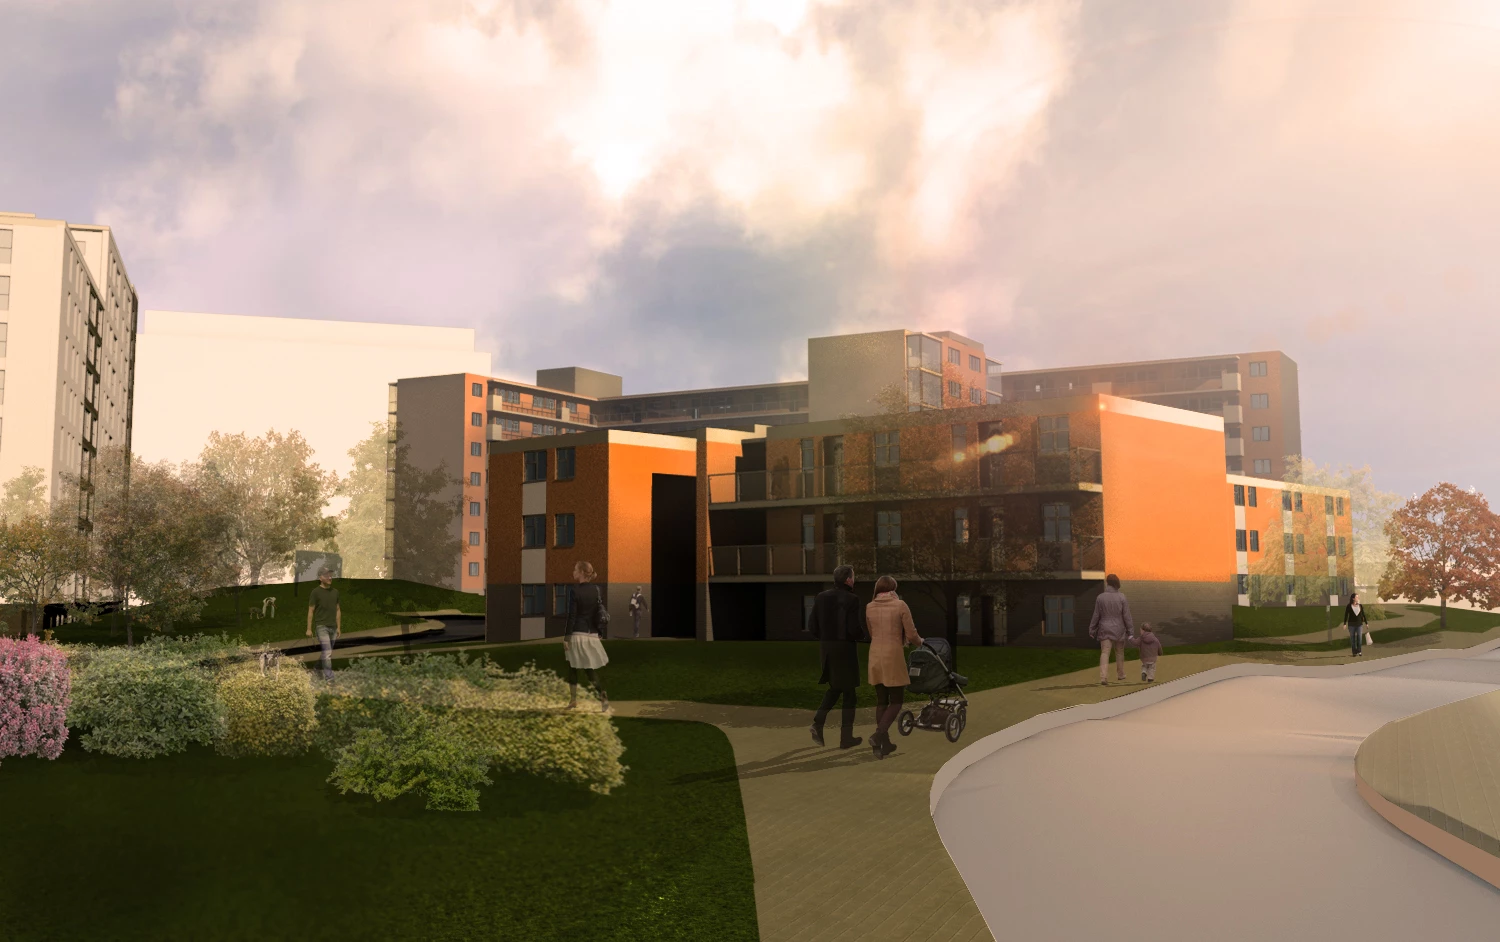 An artist's impression of Canon Green Court campus